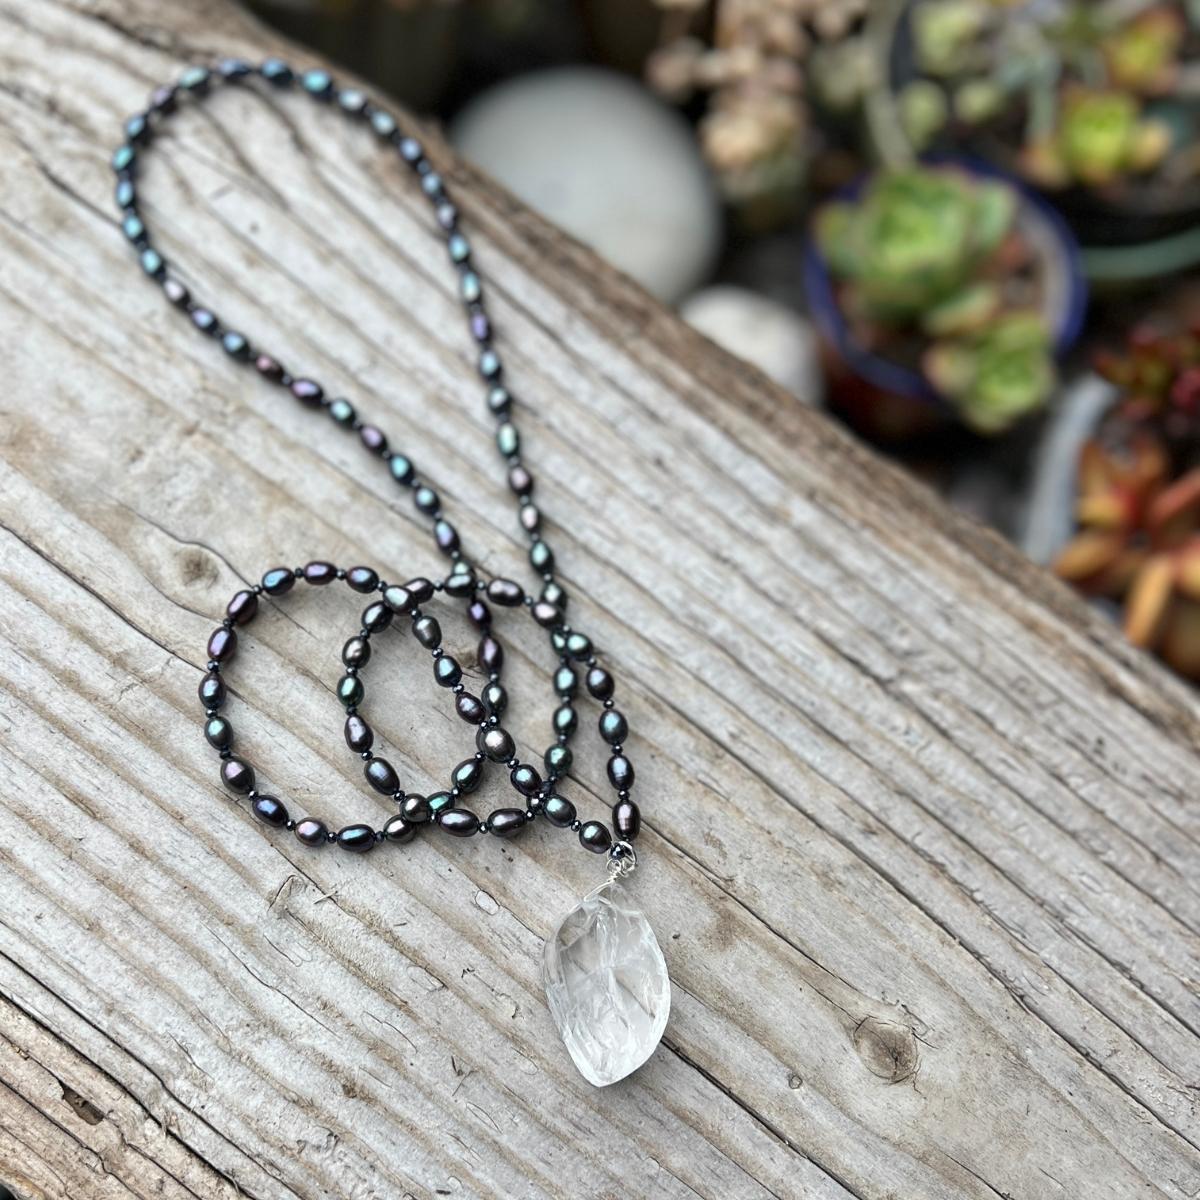 Introducing the absolutely enchanting "Conscious Chick - Pearl Necklace"! Trust me, this isn't just any necklace; it's a wearable journey that's all about you, your growth, and your unique spirit.